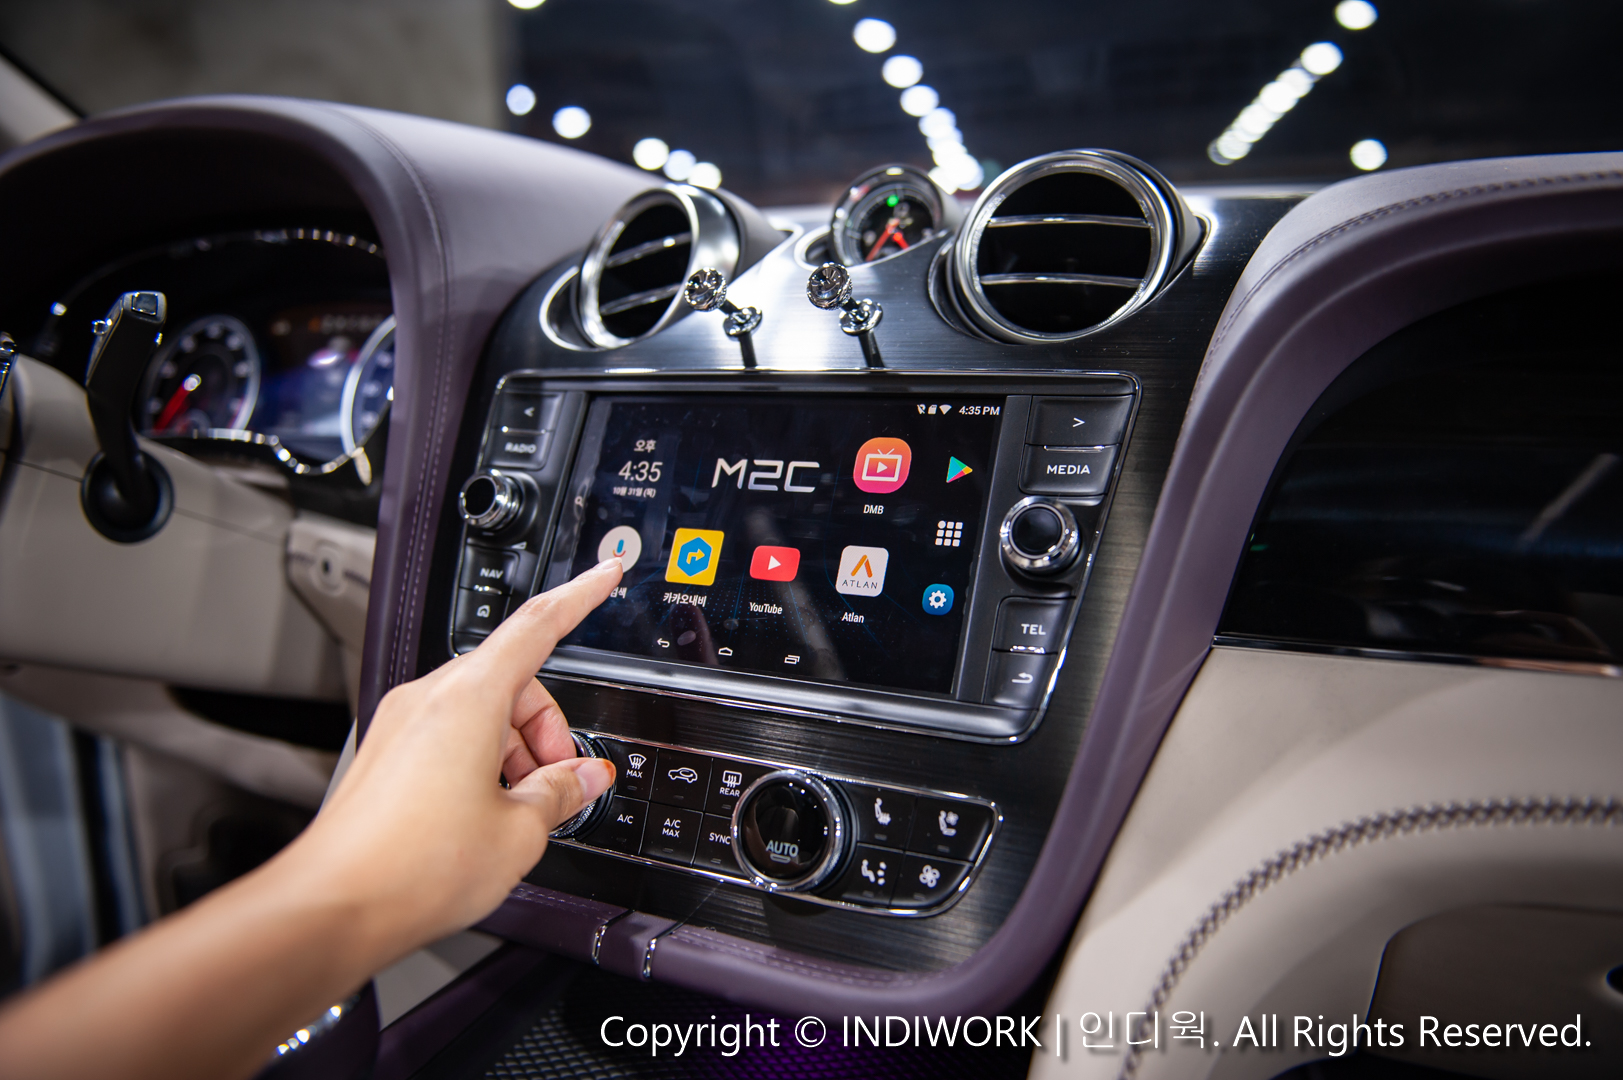 Android CAR PC system for 2019 Bentley bentayga "M2C-200A"